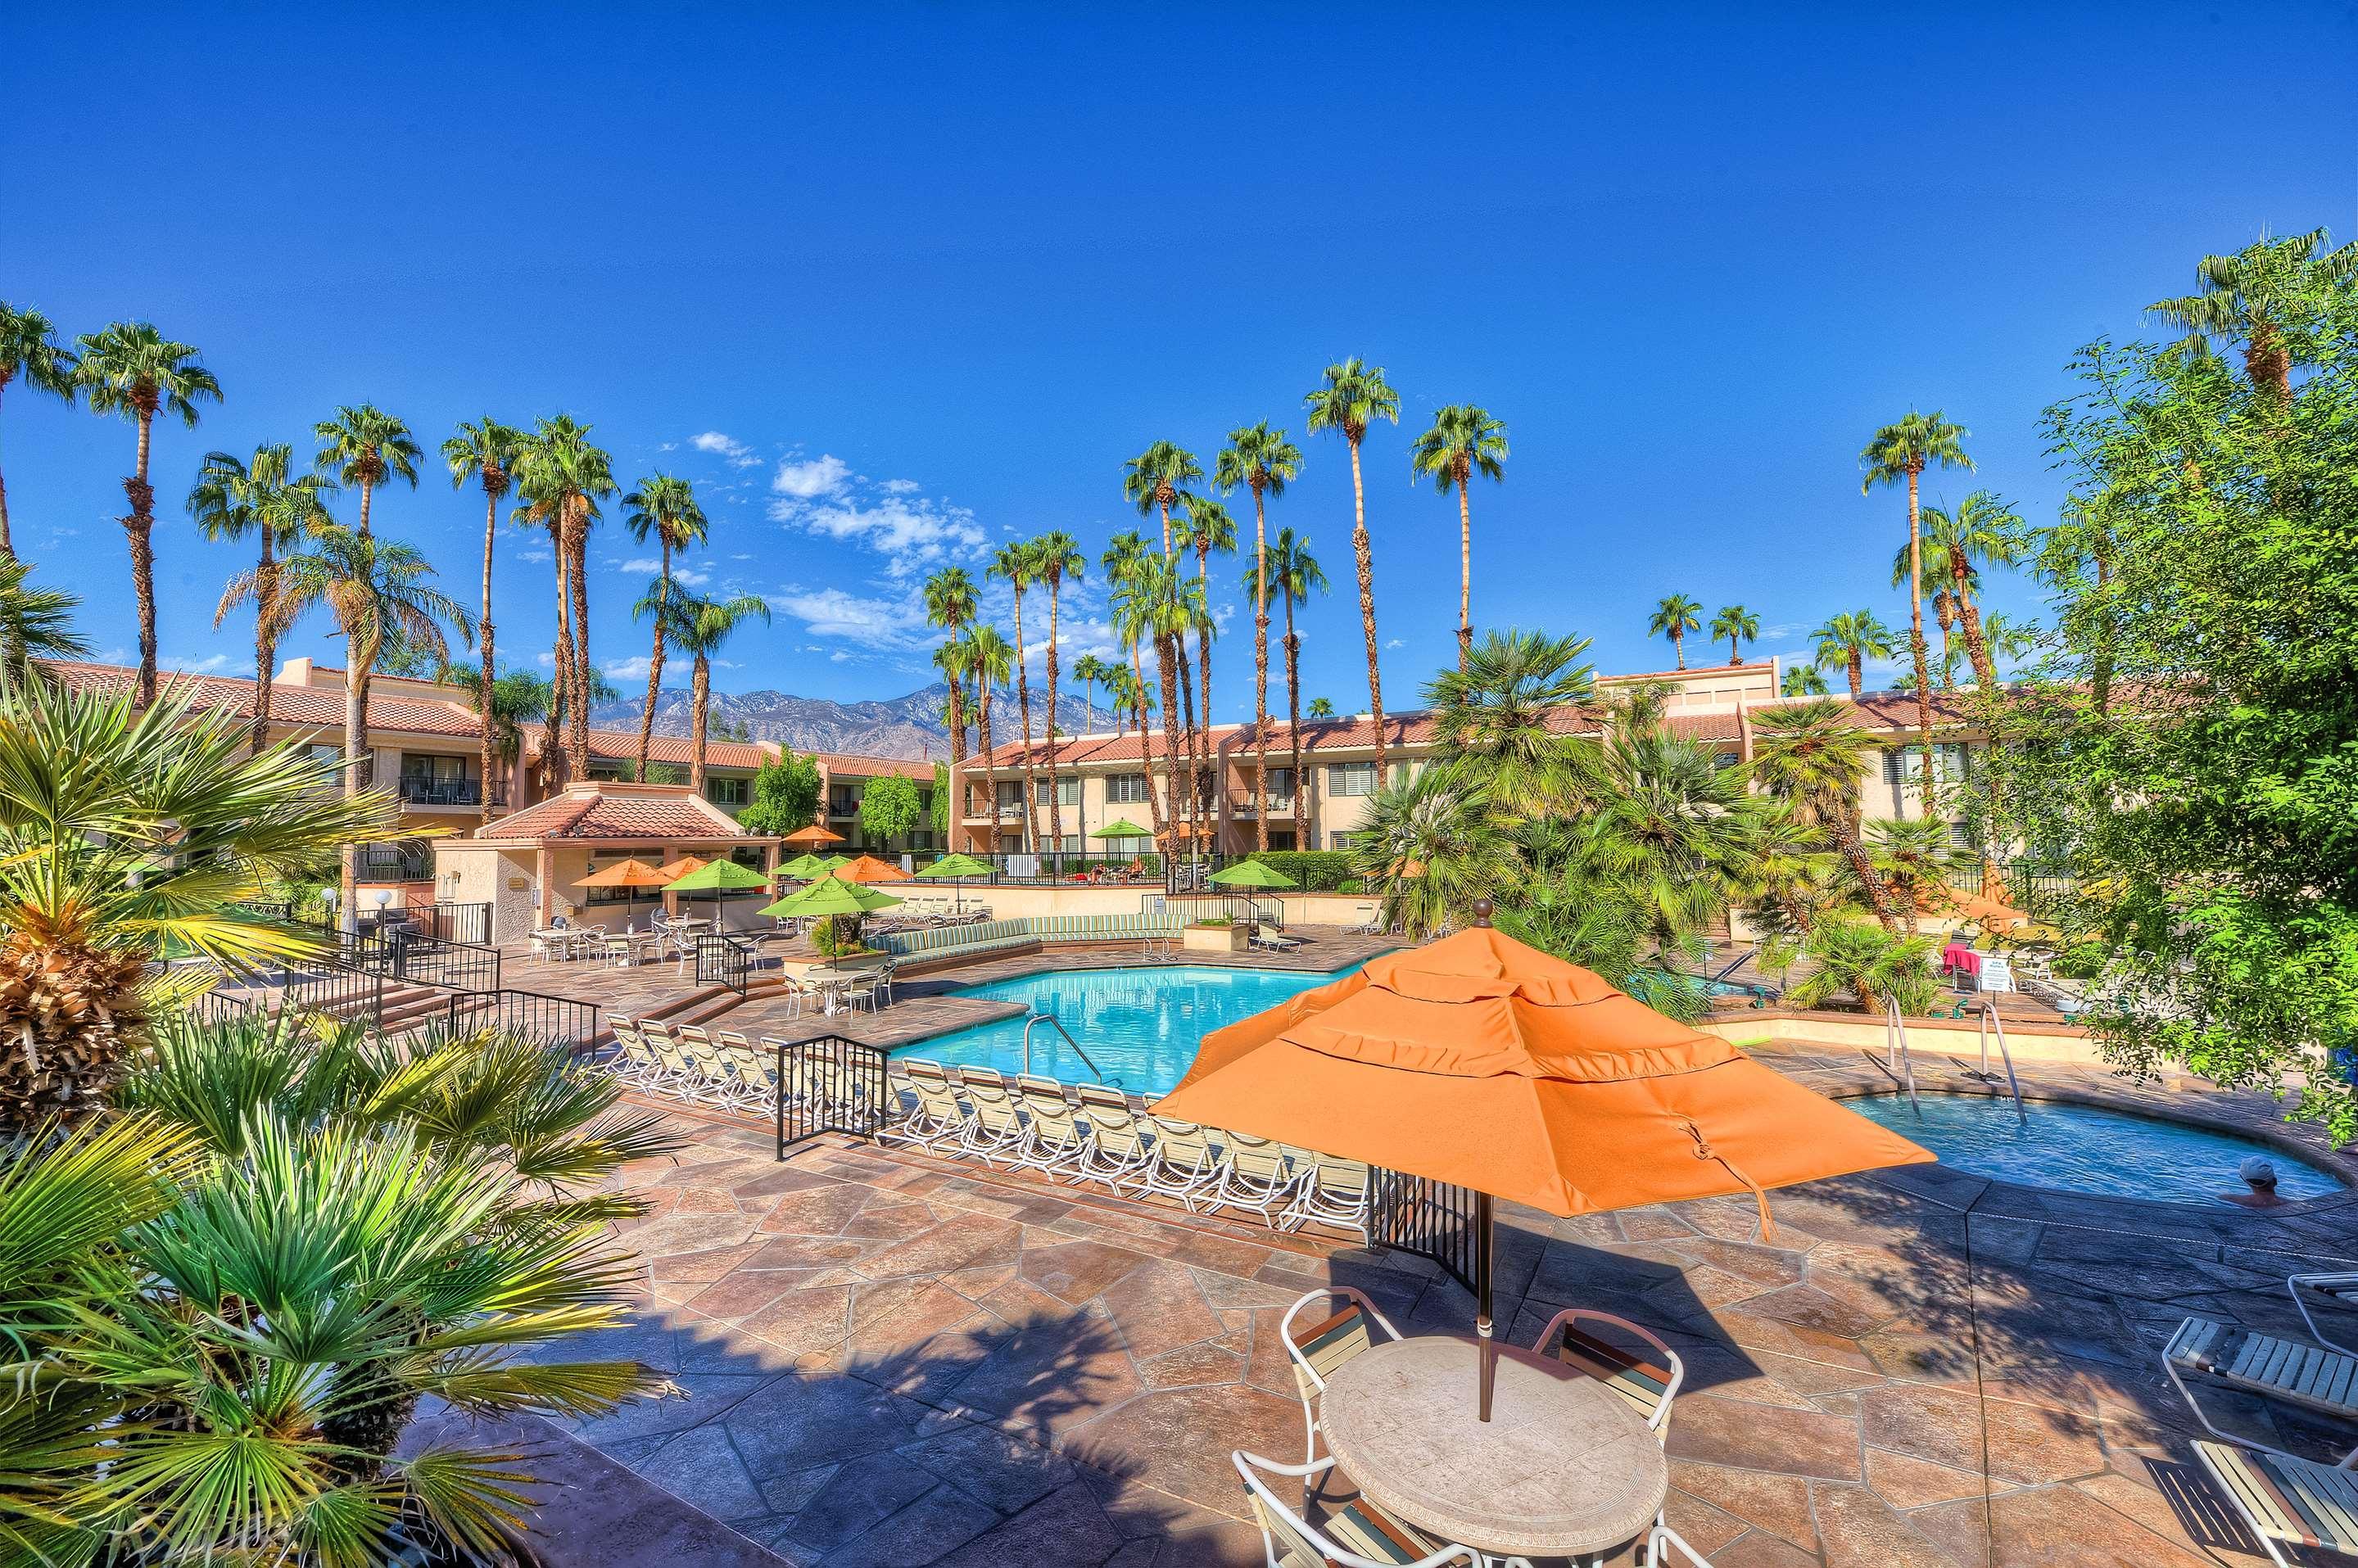 16 Best Hotels in Palm Springs. Hotels from $72/night - KAYAK